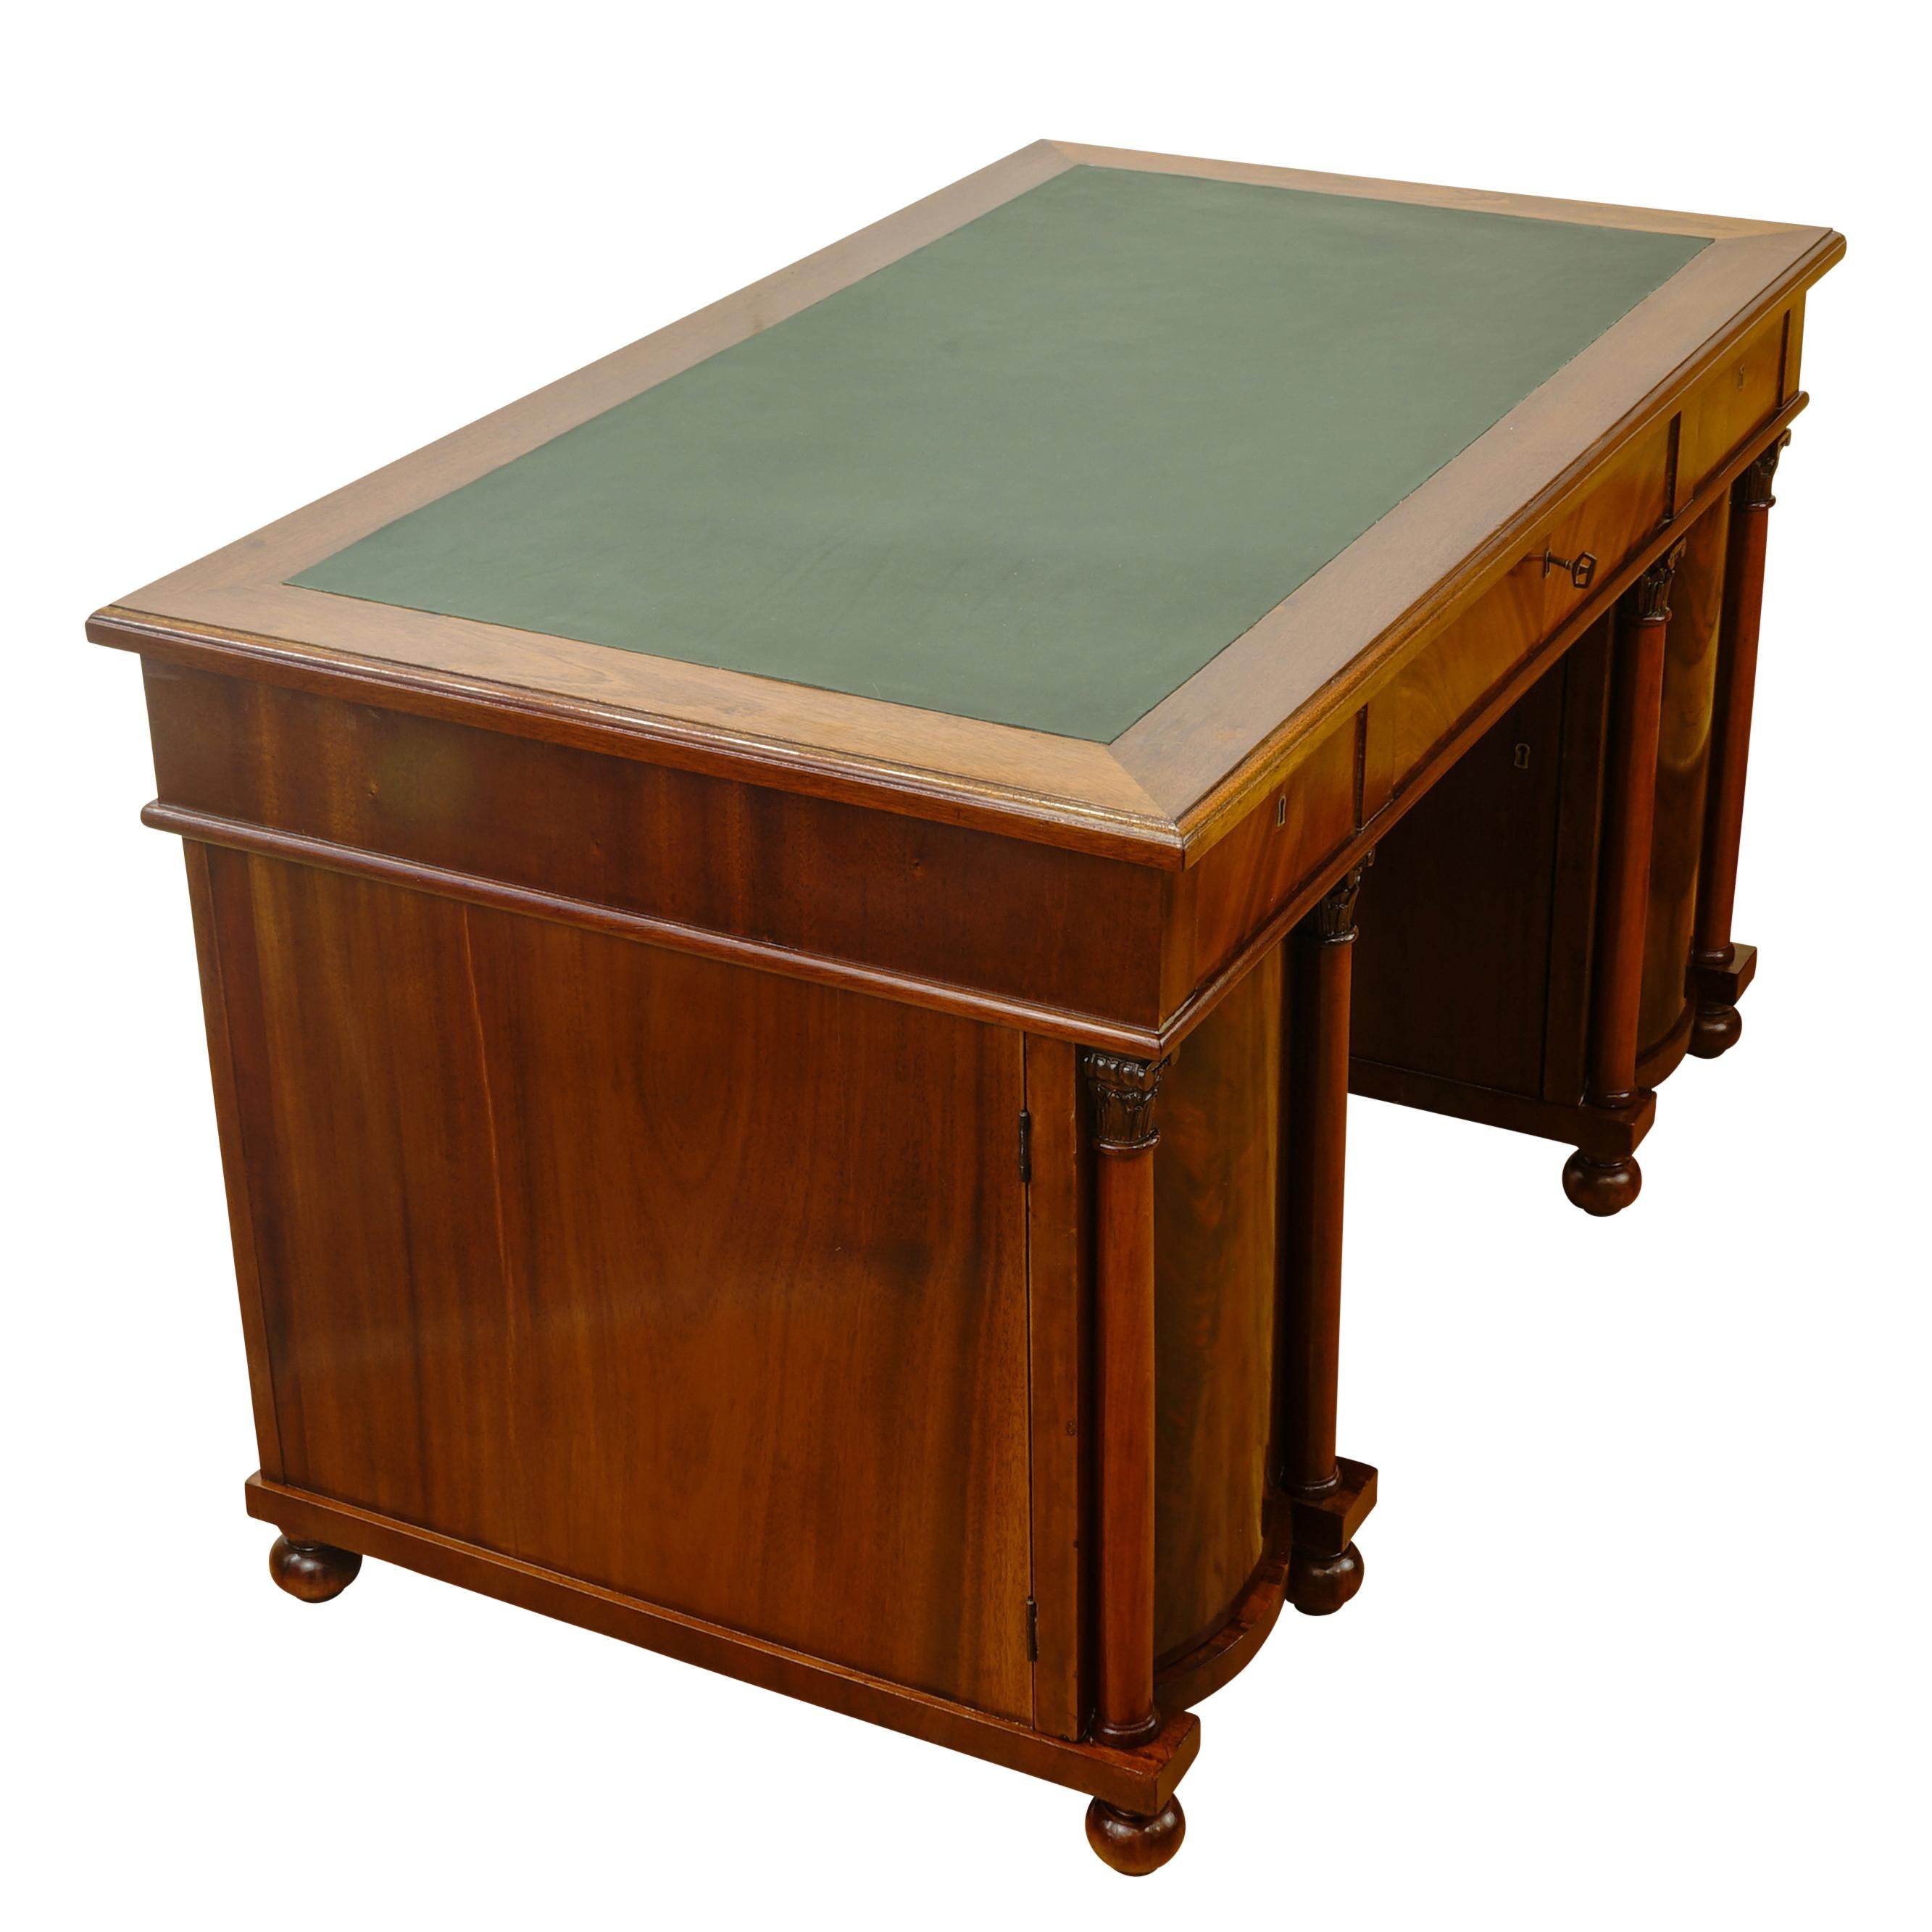 Recently fully refinished with writing surface resurfaced in green leather. This desk features two highly adorned barrel fronted storage cabinet topped by a three drawer writing surface. Original keys and hardware are fully functional.